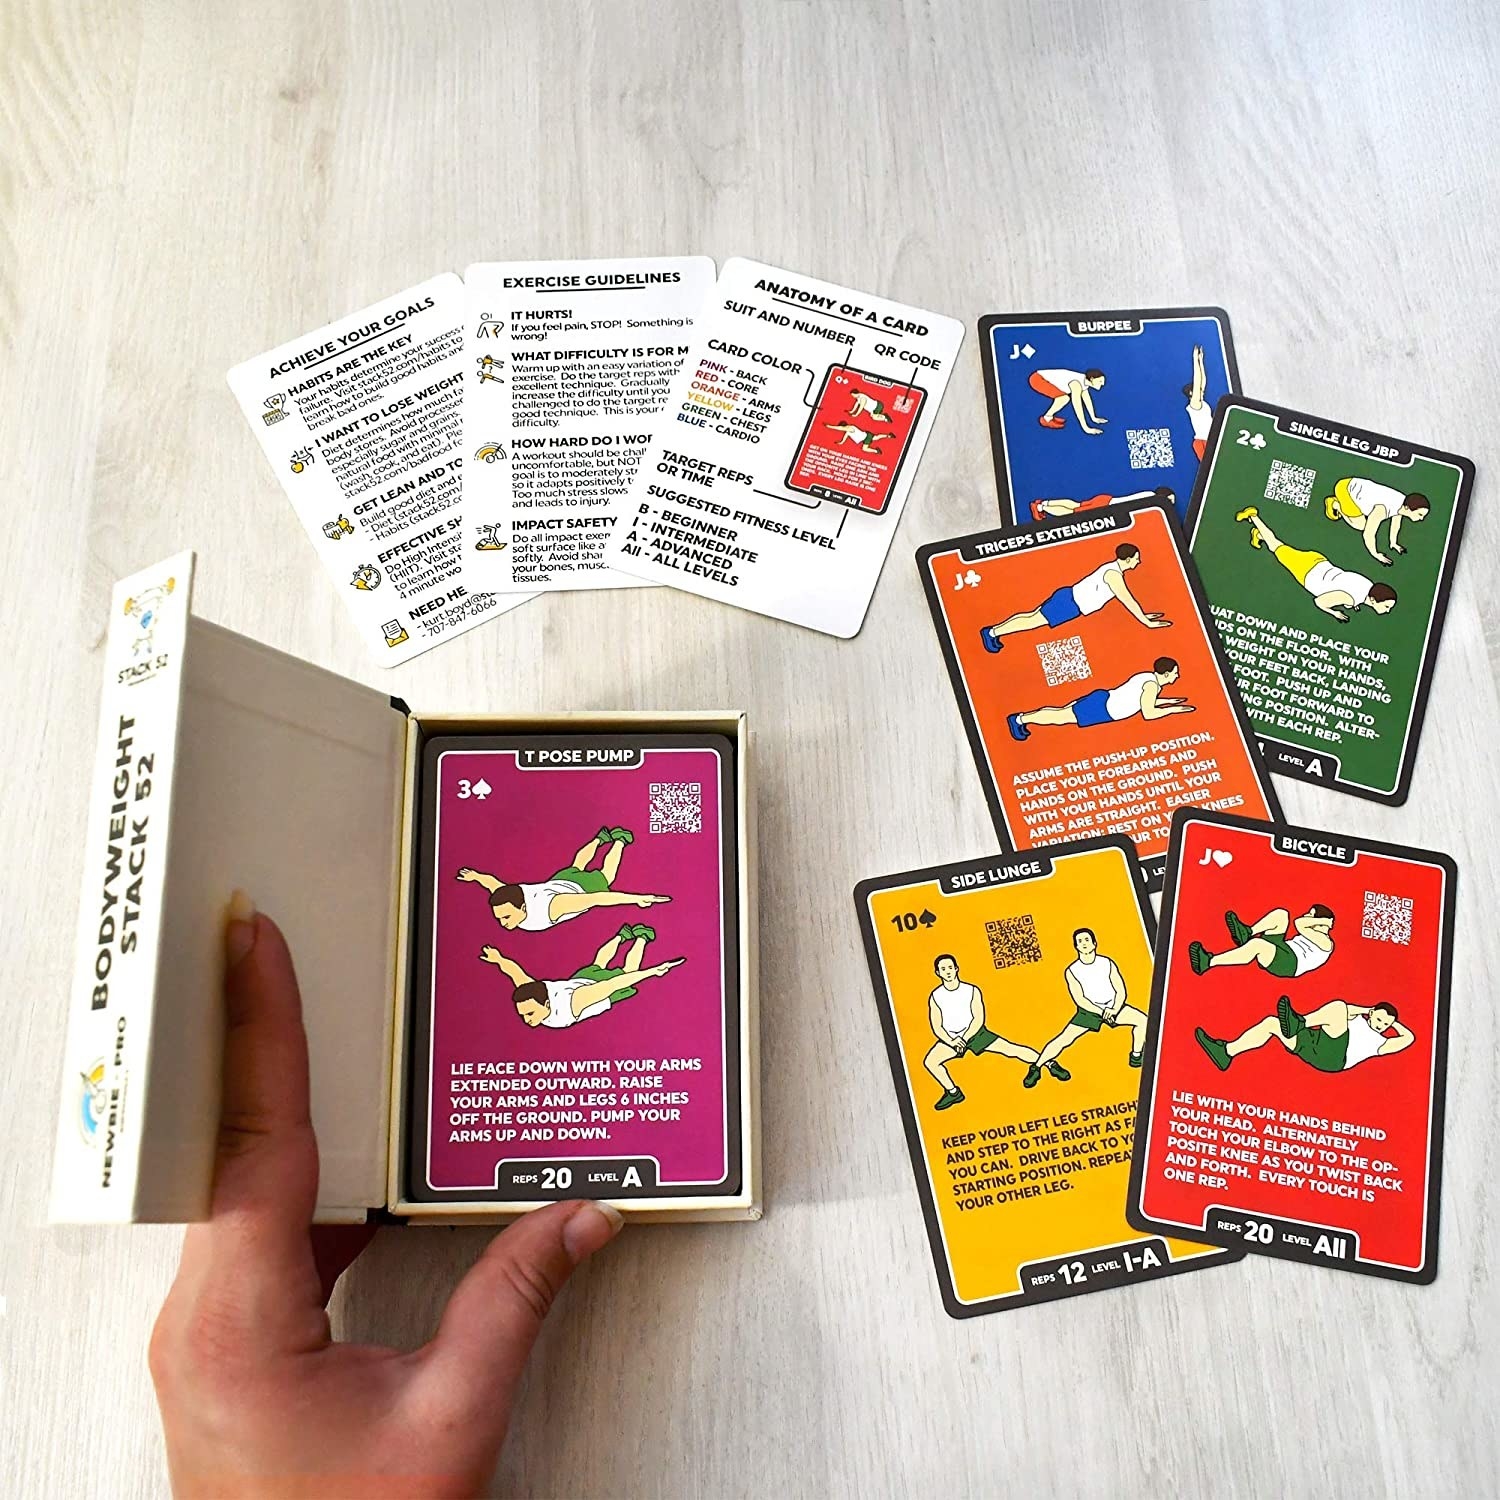 A set of cards, each printed with different bodyweight exercises and instructions to do them